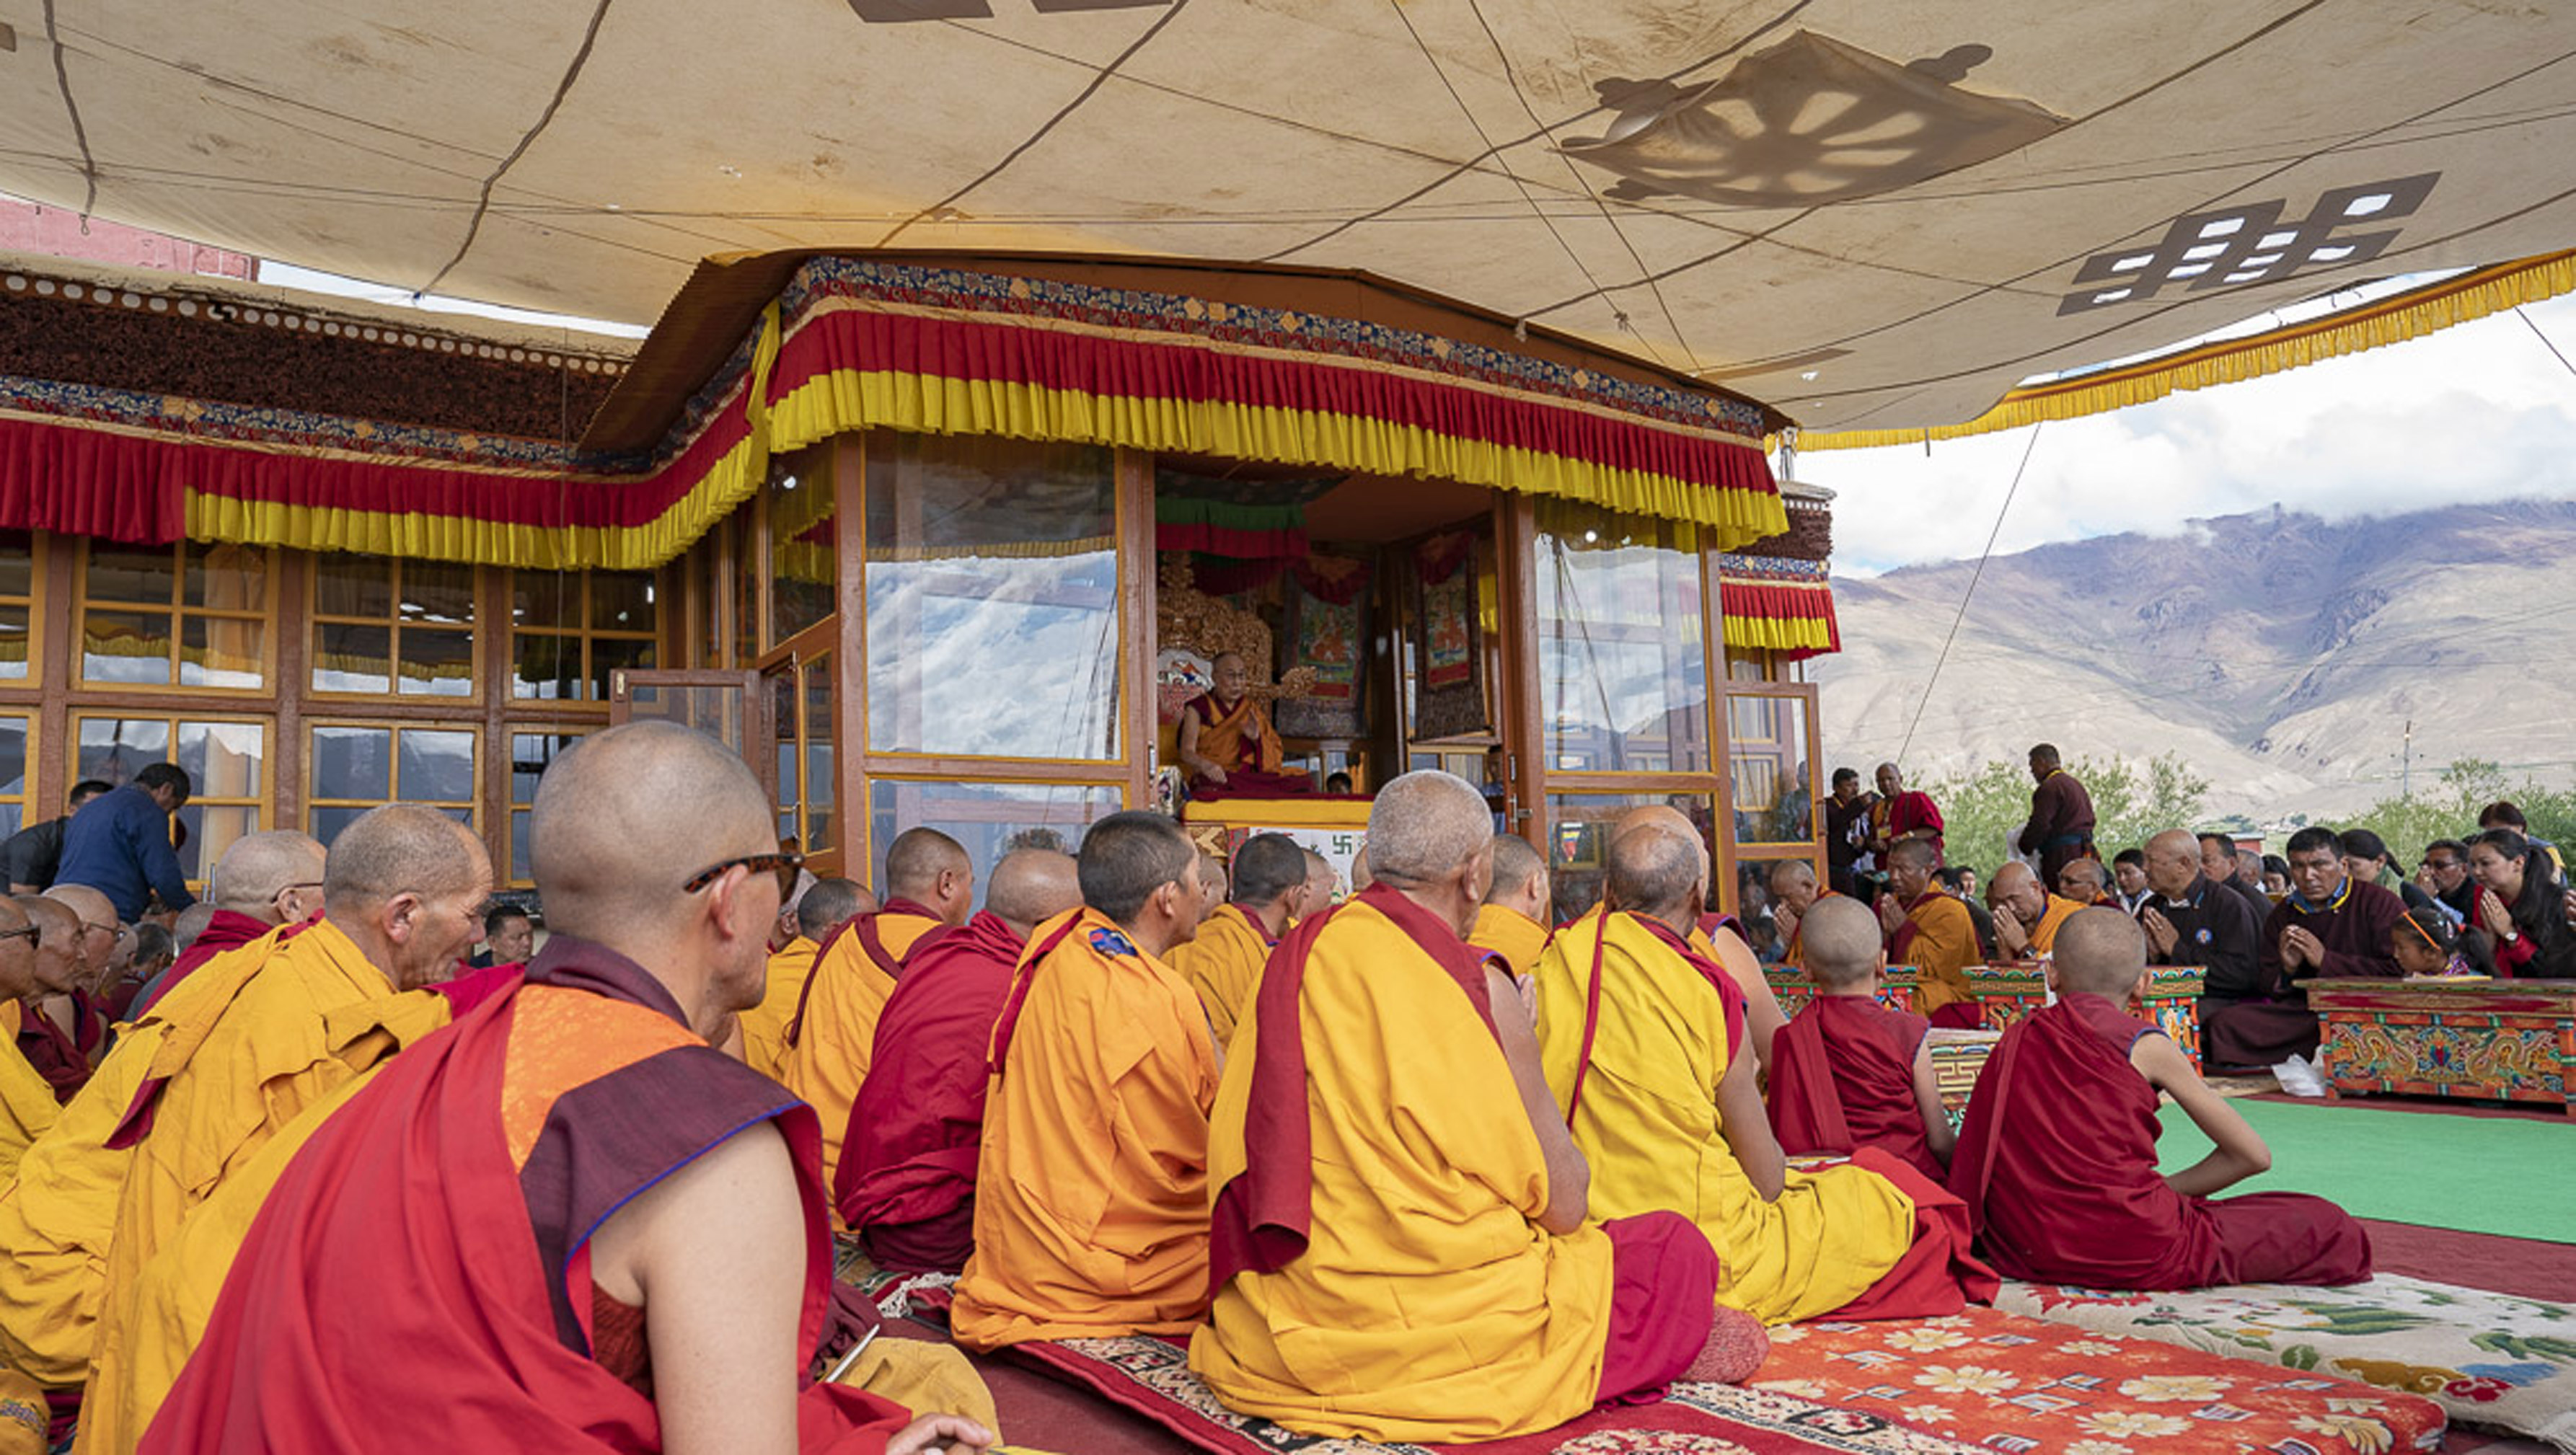 A view of the teaching pavilion during His Holiness the Dalai Lama's teaching in Padum, Zanskar, J&K, India on July 22, 2018. Photo by Tenzin Choejor